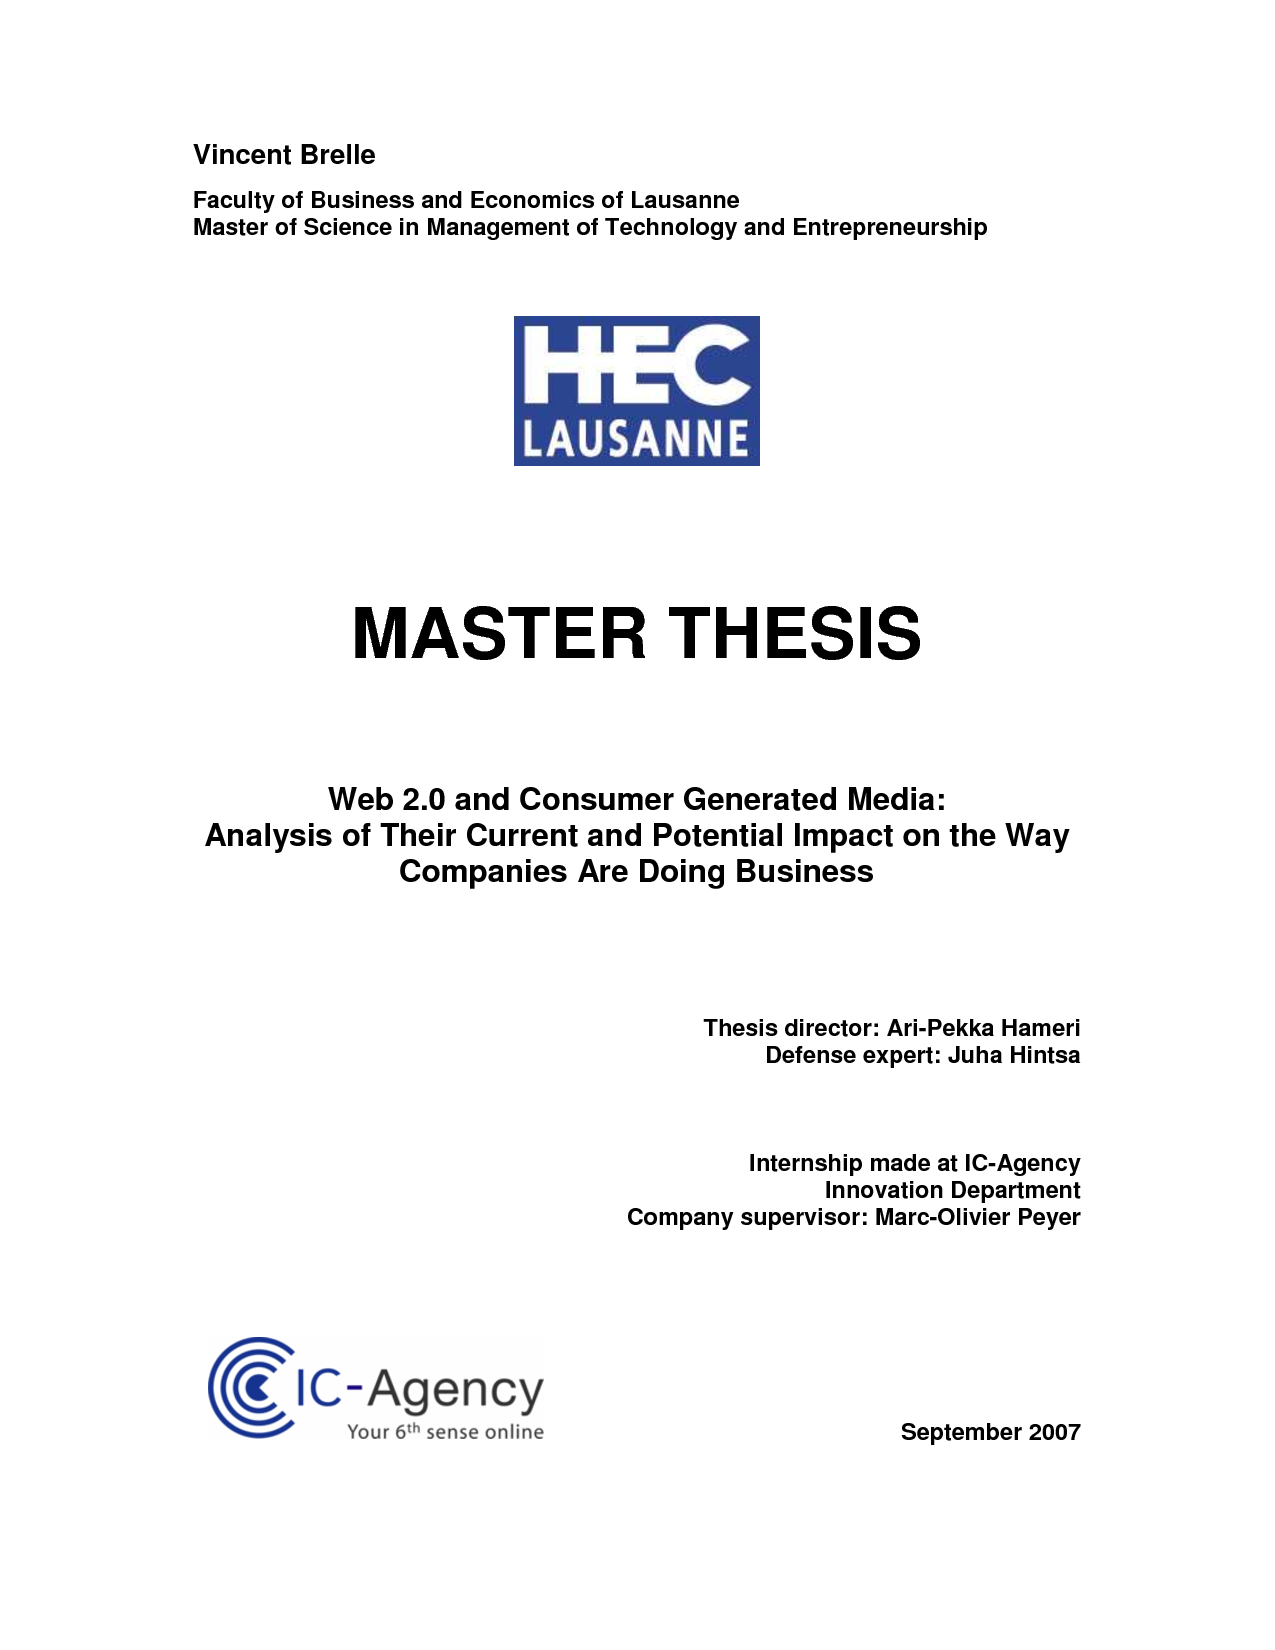 Master thesis means